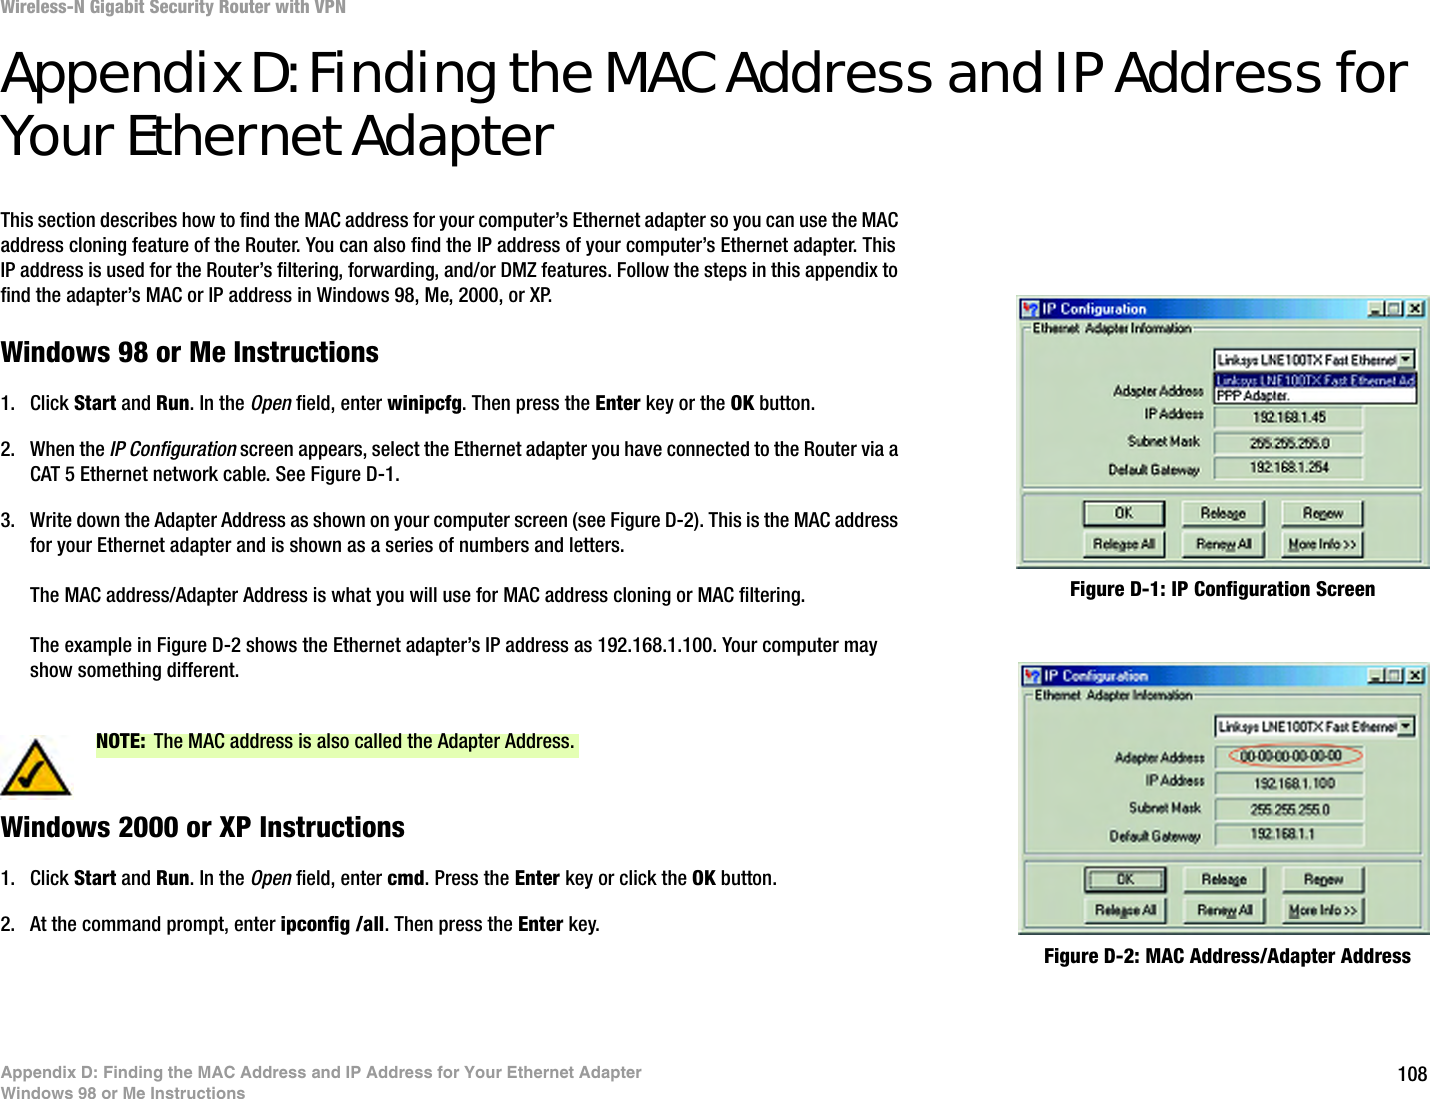 108Appendix D: Finding the MAC Address and IP Address for Your Ethernet AdapterWindows 98 or Me InstructionsWireless-N Gigabit Security Router with VPNAppendix D: Finding the MAC Address and IP Address for Your Ethernet AdapterThis section describes how to find the MAC address for your computer’s Ethernet adapter so you can use the MAC address cloning feature of the Router. You can also find the IP address of your computer’s Ethernet adapter. This IP address is used for the Router’s filtering, forwarding, and/or DMZ features. Follow the steps in this appendix to find the adapter’s MAC or IP address in Windows 98, Me, 2000, or XP.Windows 98 or Me Instructions1. Click Start and Run. In the Open field, enter winipcfg. Then press the Enter key or the OK button. 2. When the IP Configuration screen appears, select the Ethernet adapter you have connected to the Router via a CAT 5 Ethernet network cable. See Figure D-1.3. Write down the Adapter Address as shown on your computer screen (see Figure D-2). This is the MAC address for your Ethernet adapter and is shown as a series of numbers and letters.The MAC address/Adapter Address is what you will use for MAC address cloning or MAC filtering.The example in Figure D-2 shows the Ethernet adapter’s IP address as 192.168.1.100. Your computer may show something different.Windows 2000 or XP Instructions1. Click Start and Run. In the Open field, enter cmd. Press the Enter key or click the OK button.2. At the command prompt, enter ipconfig /all. Then press the Enter key.Figure D-2: MAC Address/Adapter AddressFigure D-1: IP Configuration ScreenNOTE: The MAC address is also called the Adapter Address.